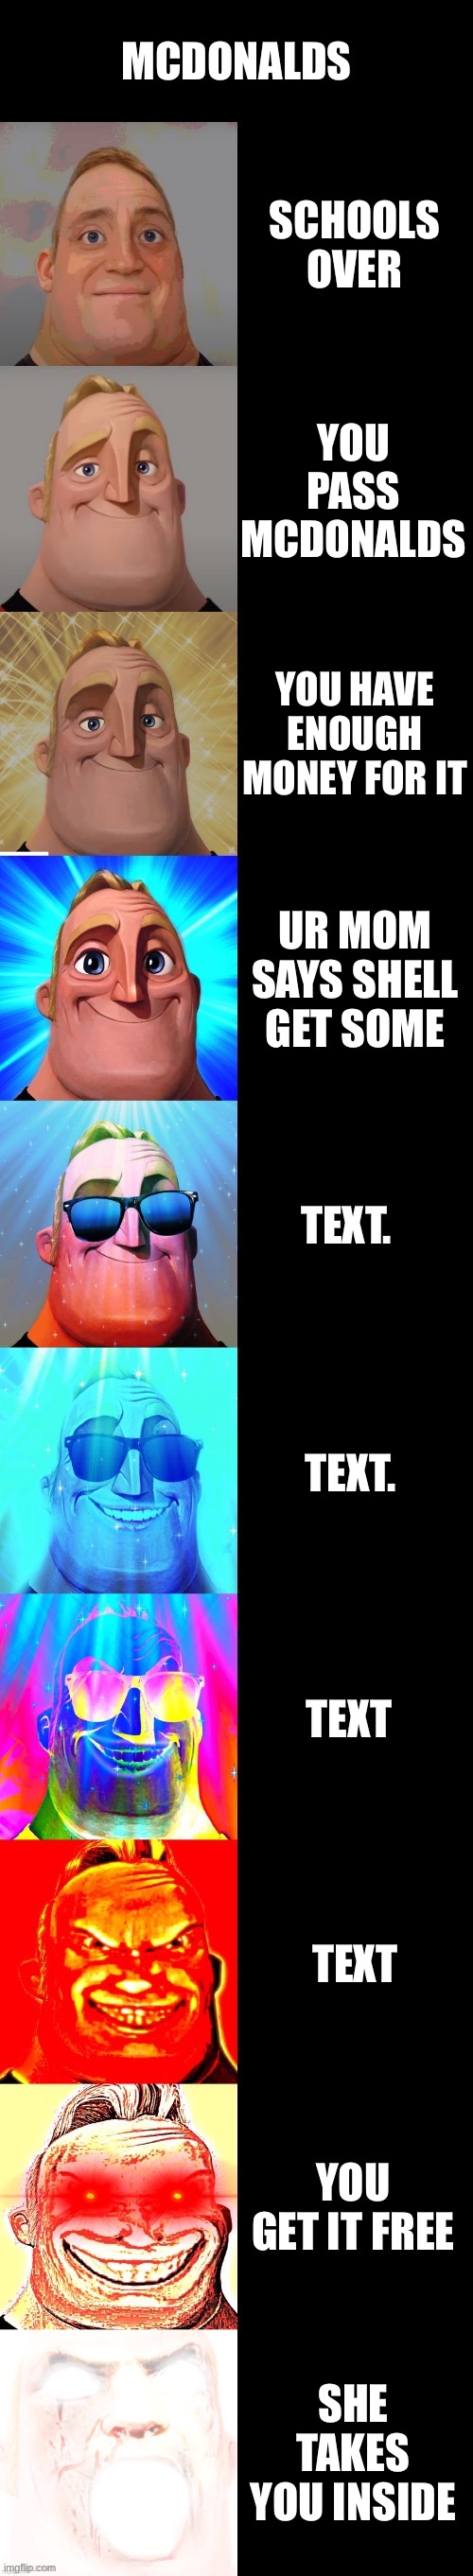 mr incredible becoming canny | MCDONALDS SCHOOLS OVER YOU PASS MCDONALDS YOU HAVE ENOUGH MONEY FOR IT UR MOM SAYS SHELL GET SOME TEXT. TEXT. TEXT TEXT YOU GET IT FREE SHE  | image tagged in mr incredible becoming canny | made w/ Imgflip meme maker